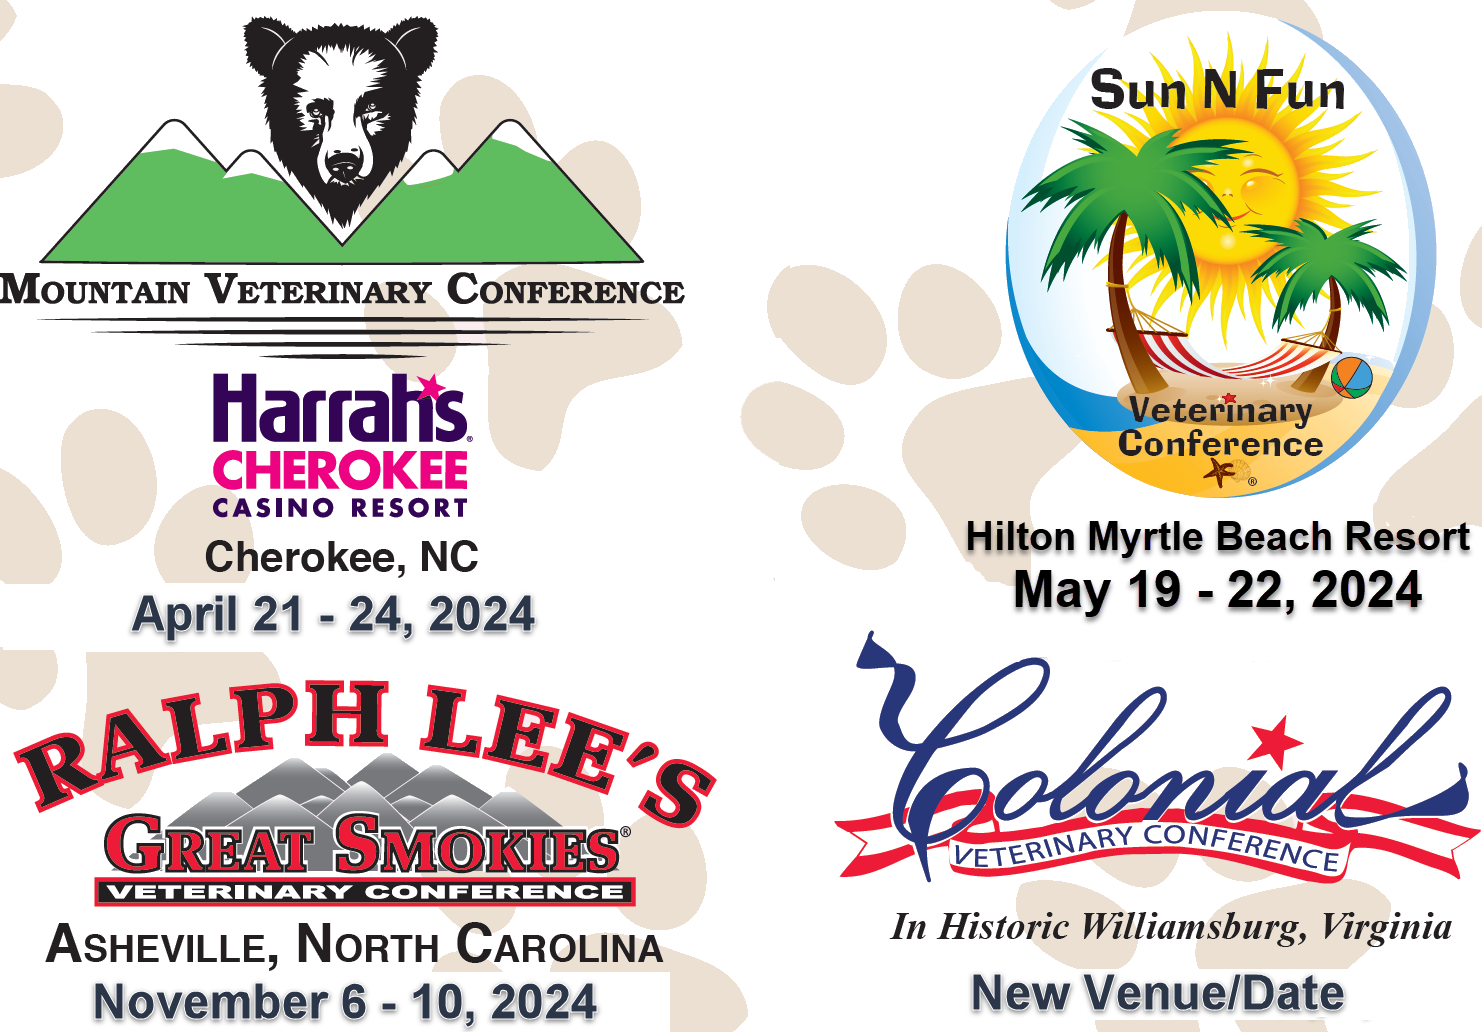 Our Conferences for 2024: Mountian Veterinary Conference, Sun N Fun Veterinary Conference, Ralph Lee's Great Smokies Veterinary Conference and Colonial Veterinar Conference